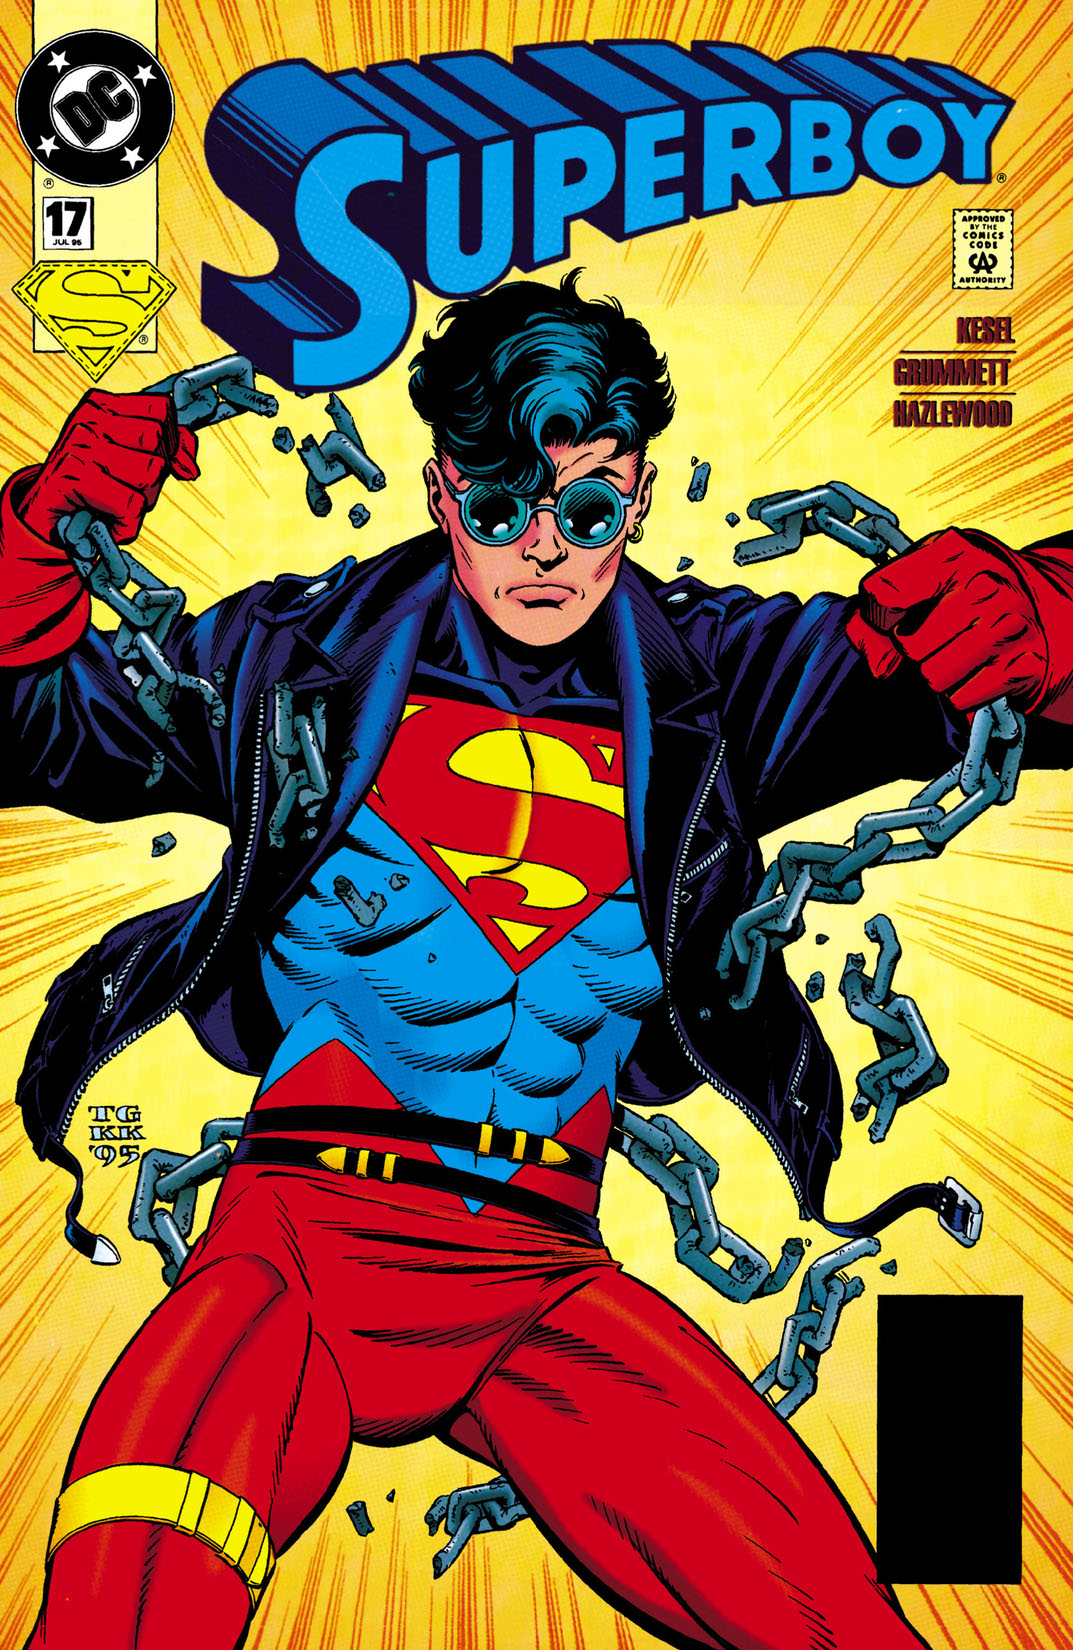 Superboy (1993-) #17 preview images